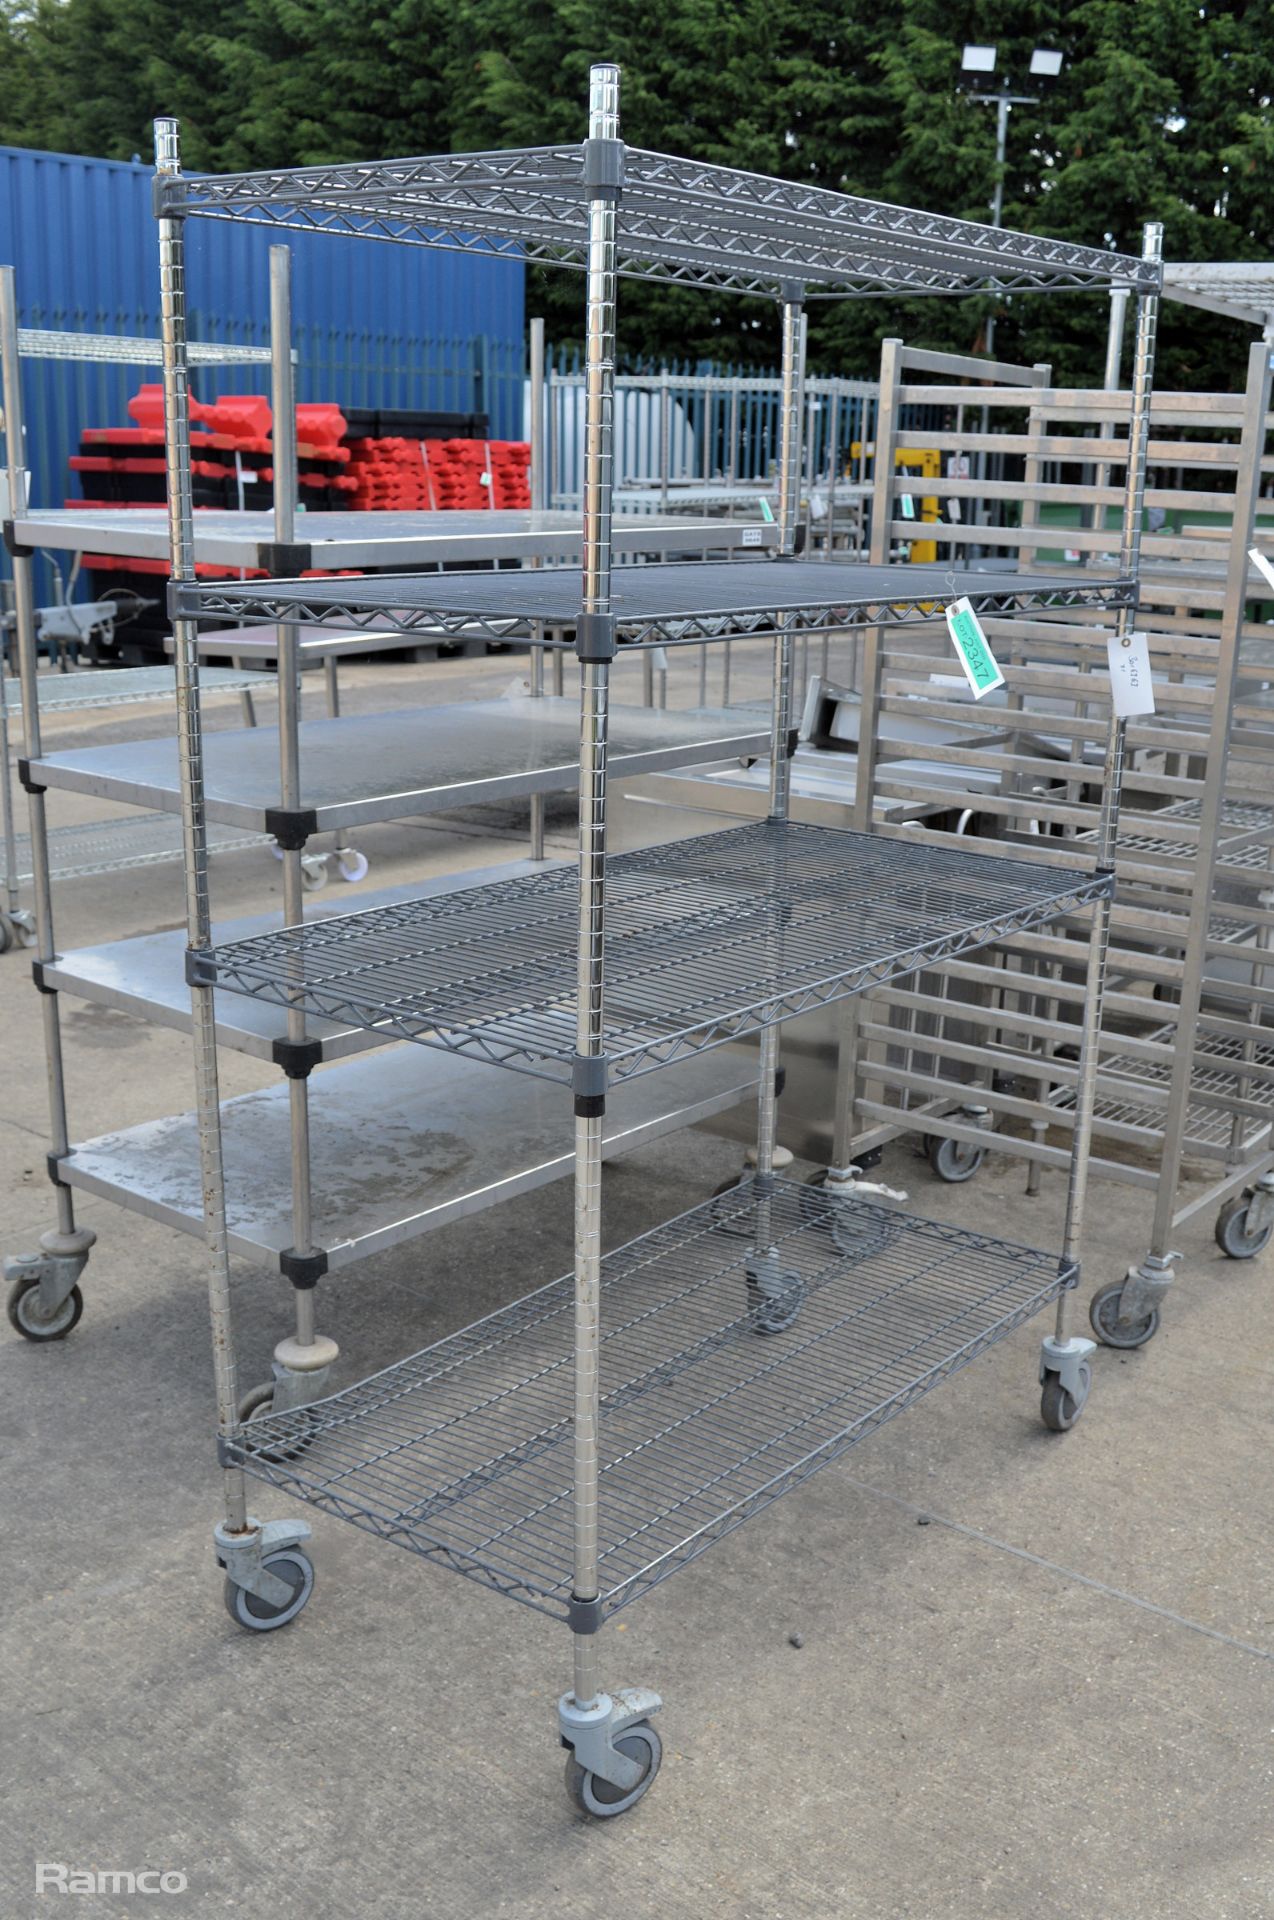 Stainless steel 4 tier wire racking L120 X W60 x H177cm - Image 3 of 3